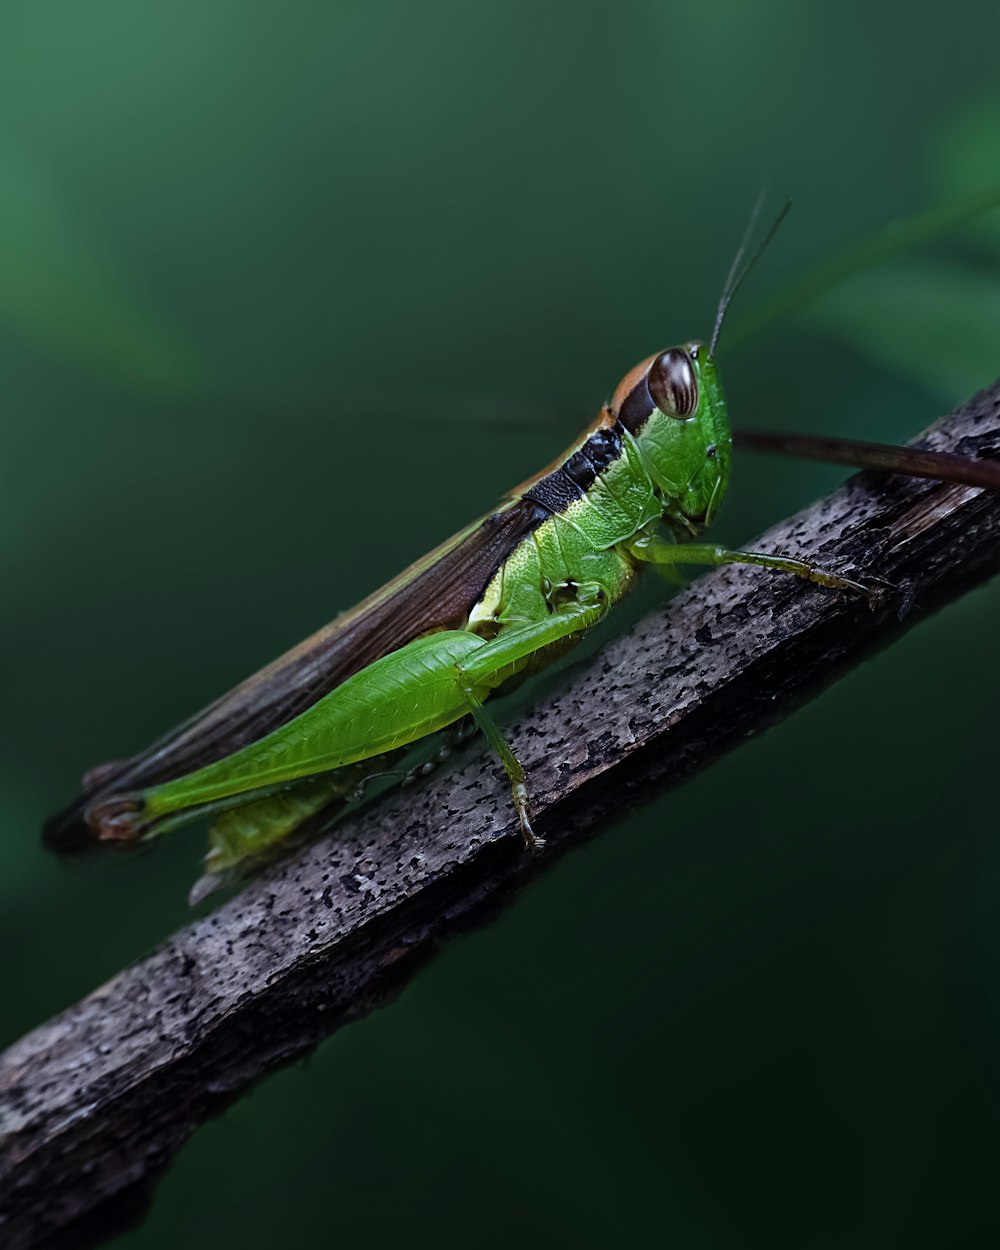 a close up of a grasshopper on a branch